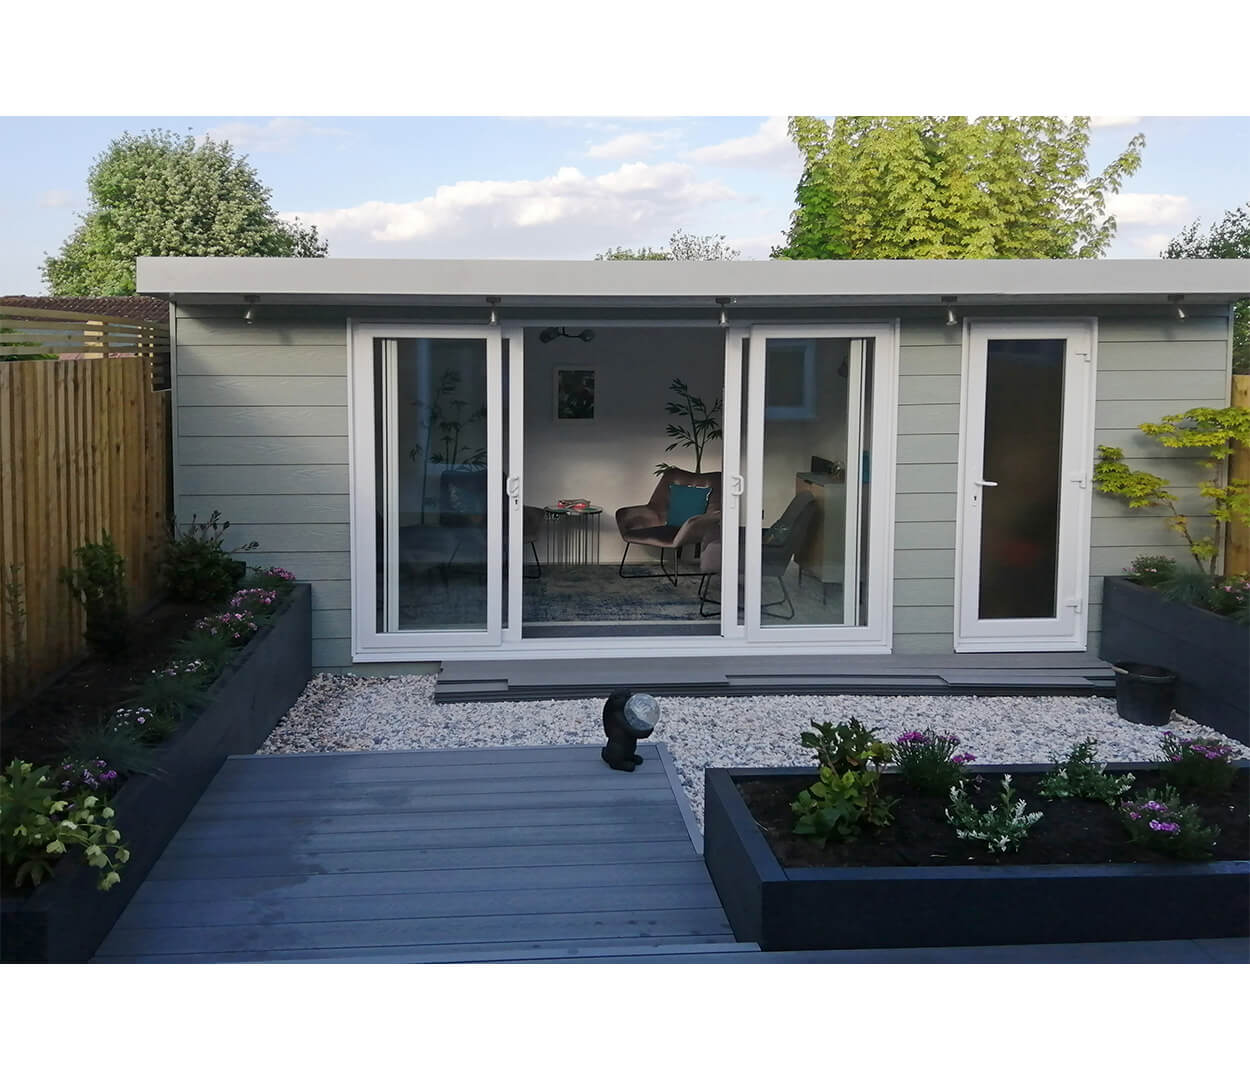 Sage Green Fibre Cement Wall Cladding Boards protect this cosy garden room